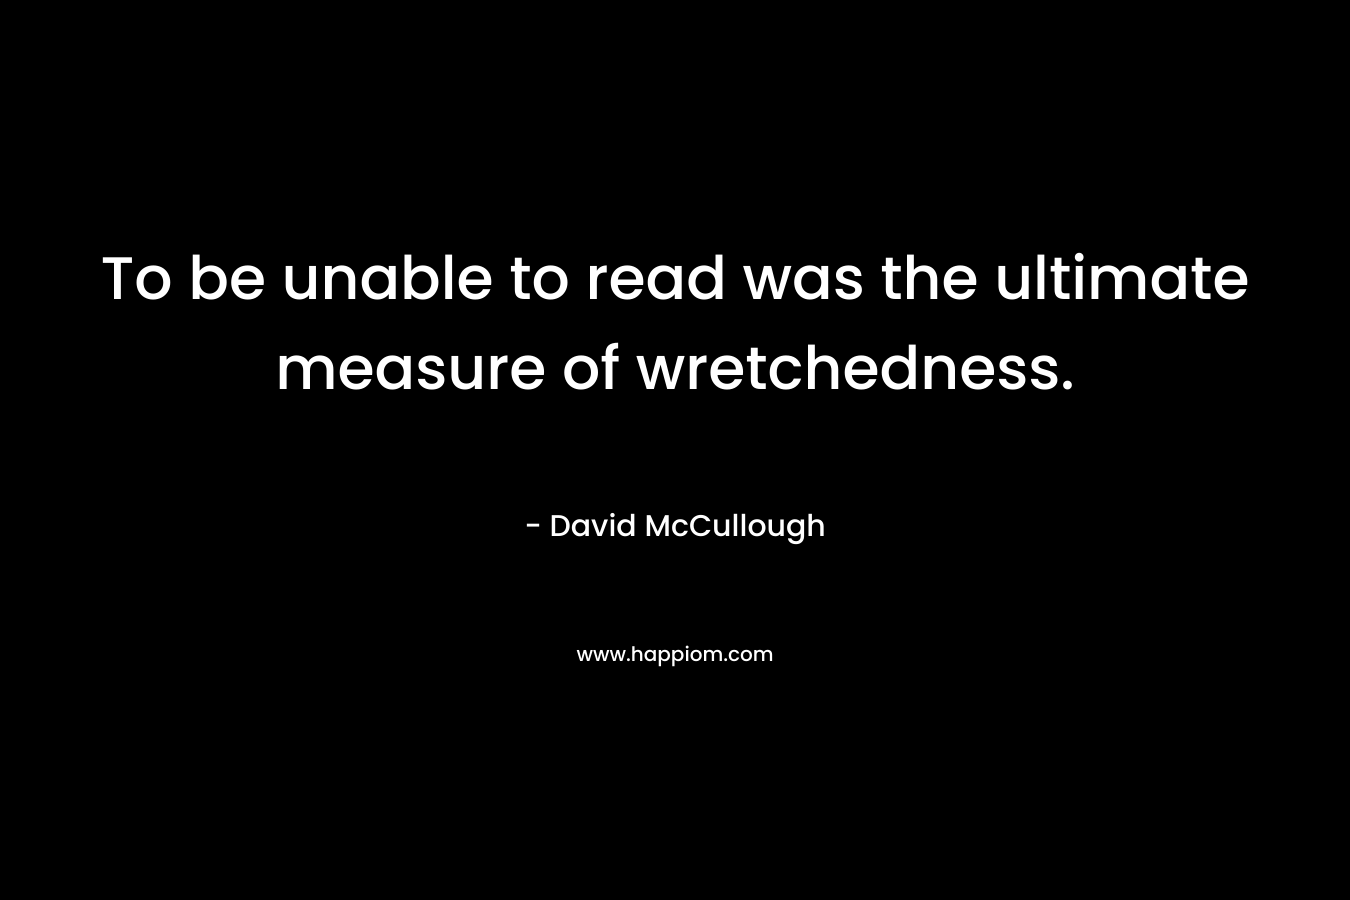 To be unable to read was the ultimate measure of wretchedness. – David McCullough